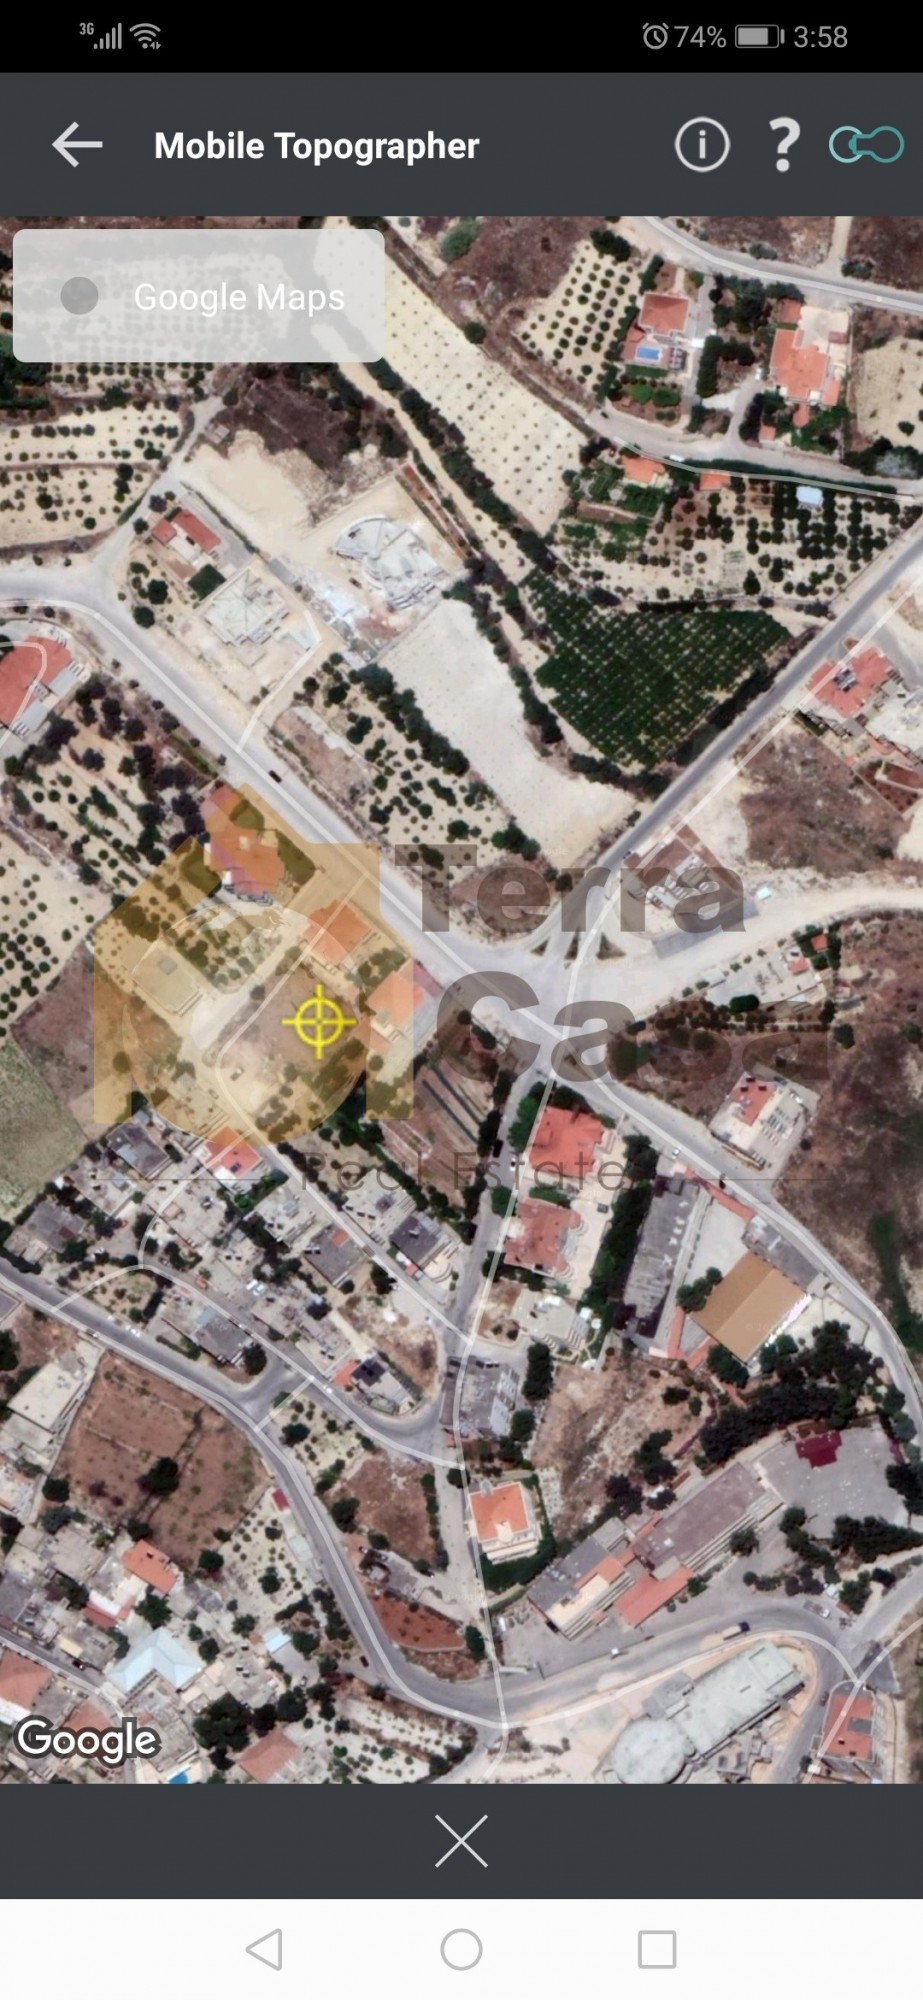 Land for sale in zahle prime residential area.